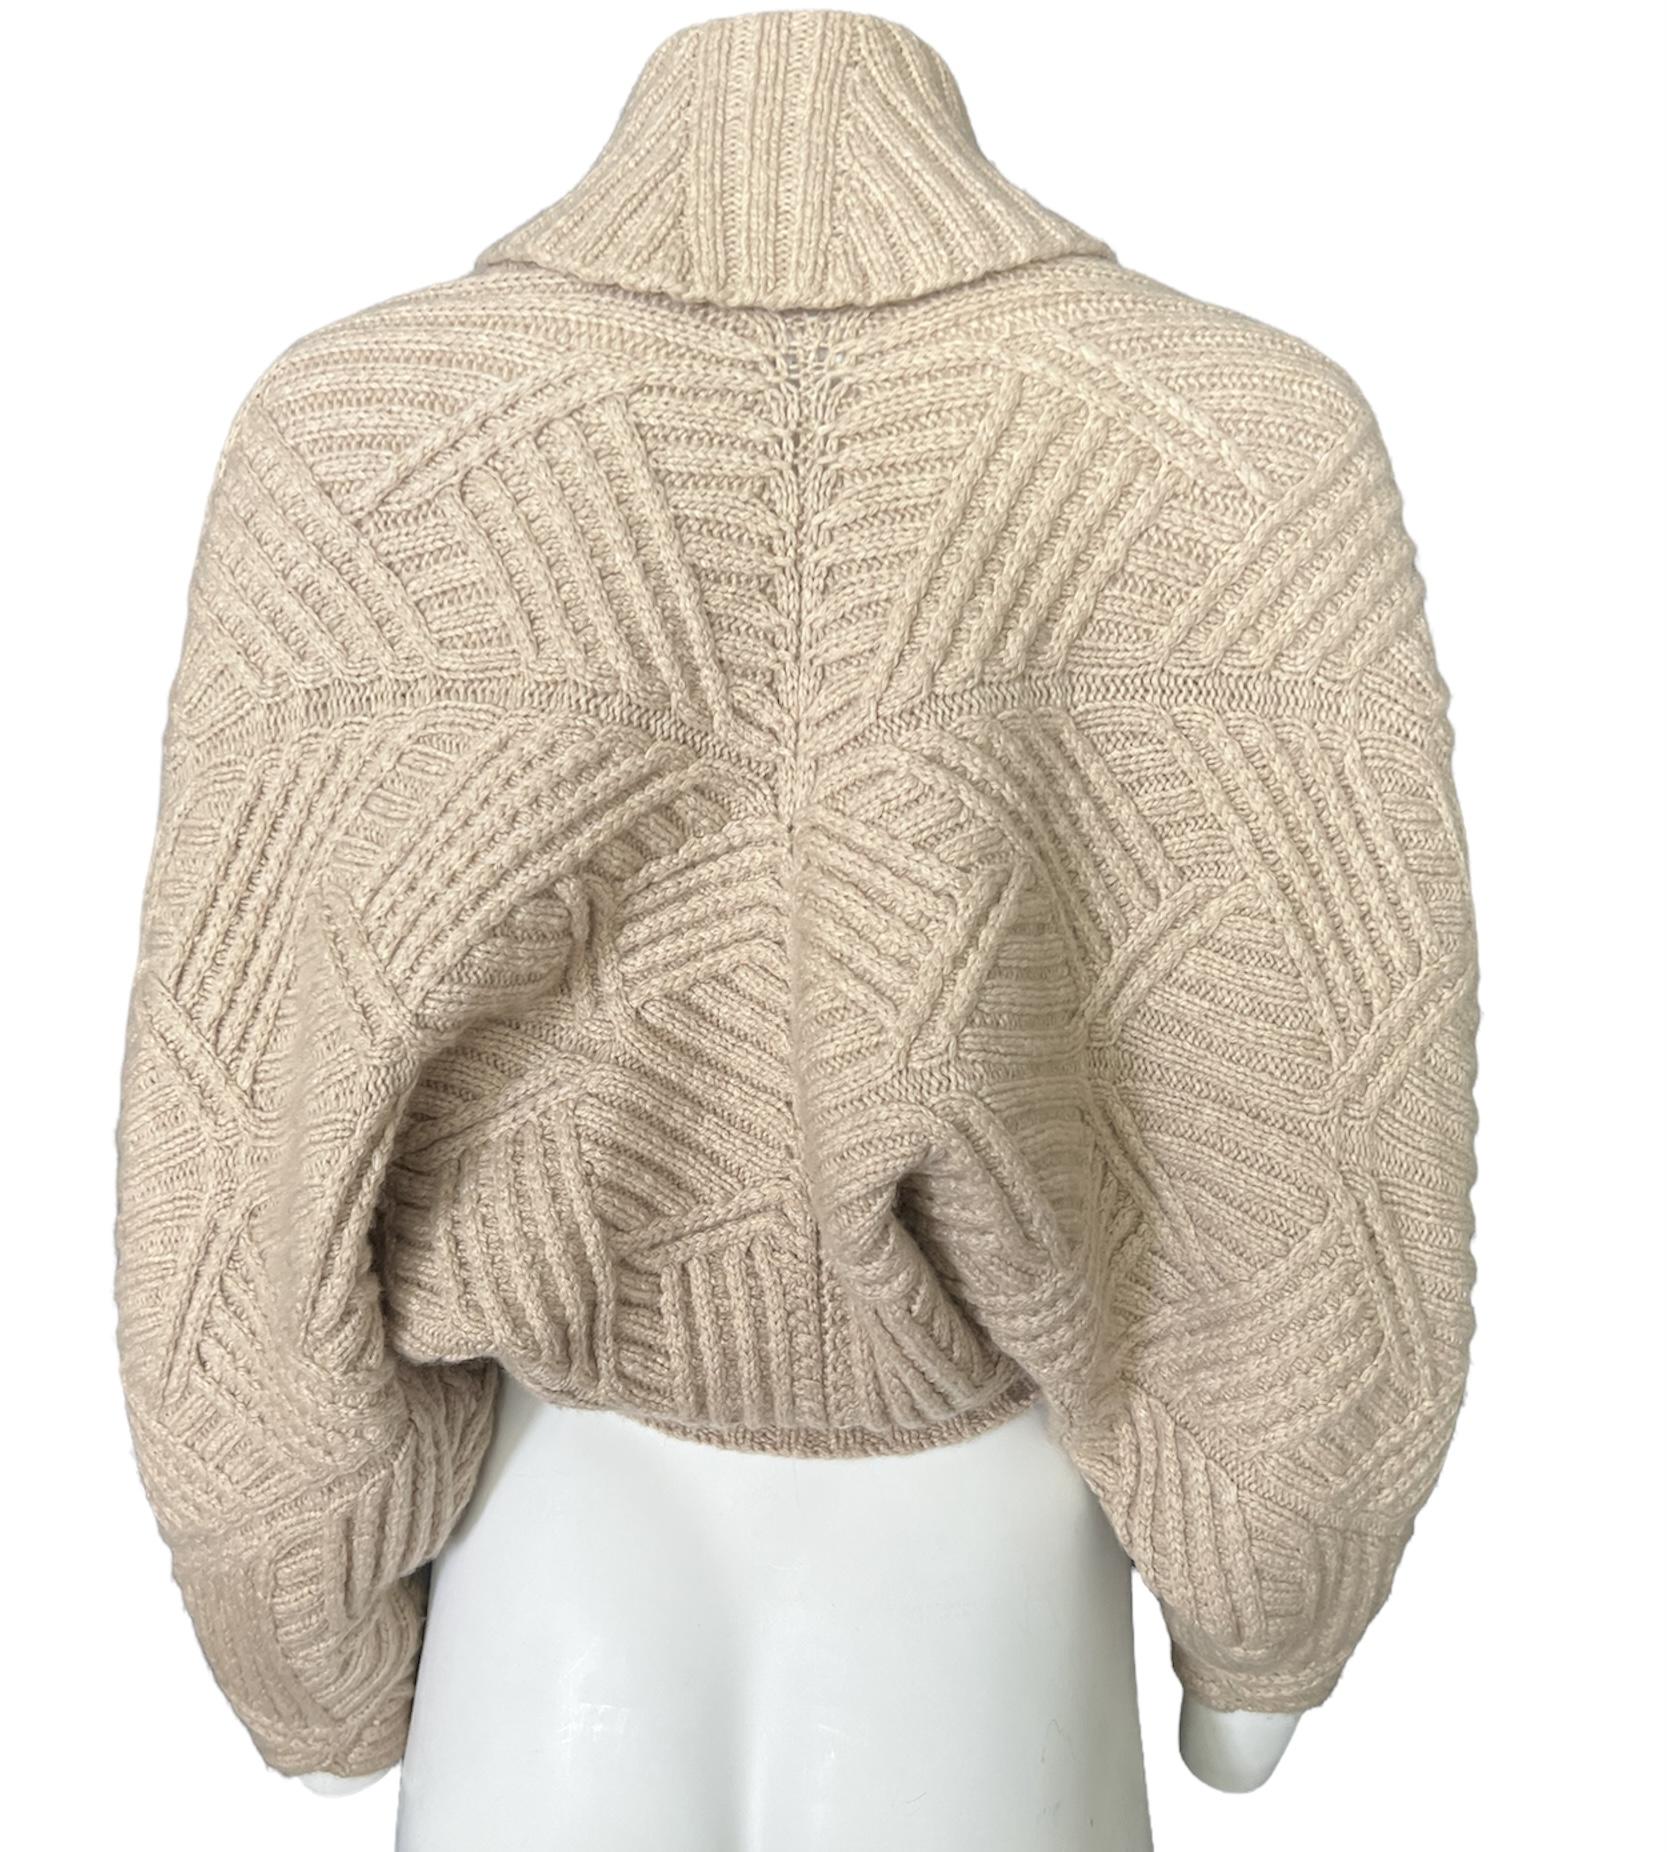 Vintage Oscar de la Renta Beige Cardigan Sweater, Size Small In Excellent Condition For Sale In Beverly Hills, CA